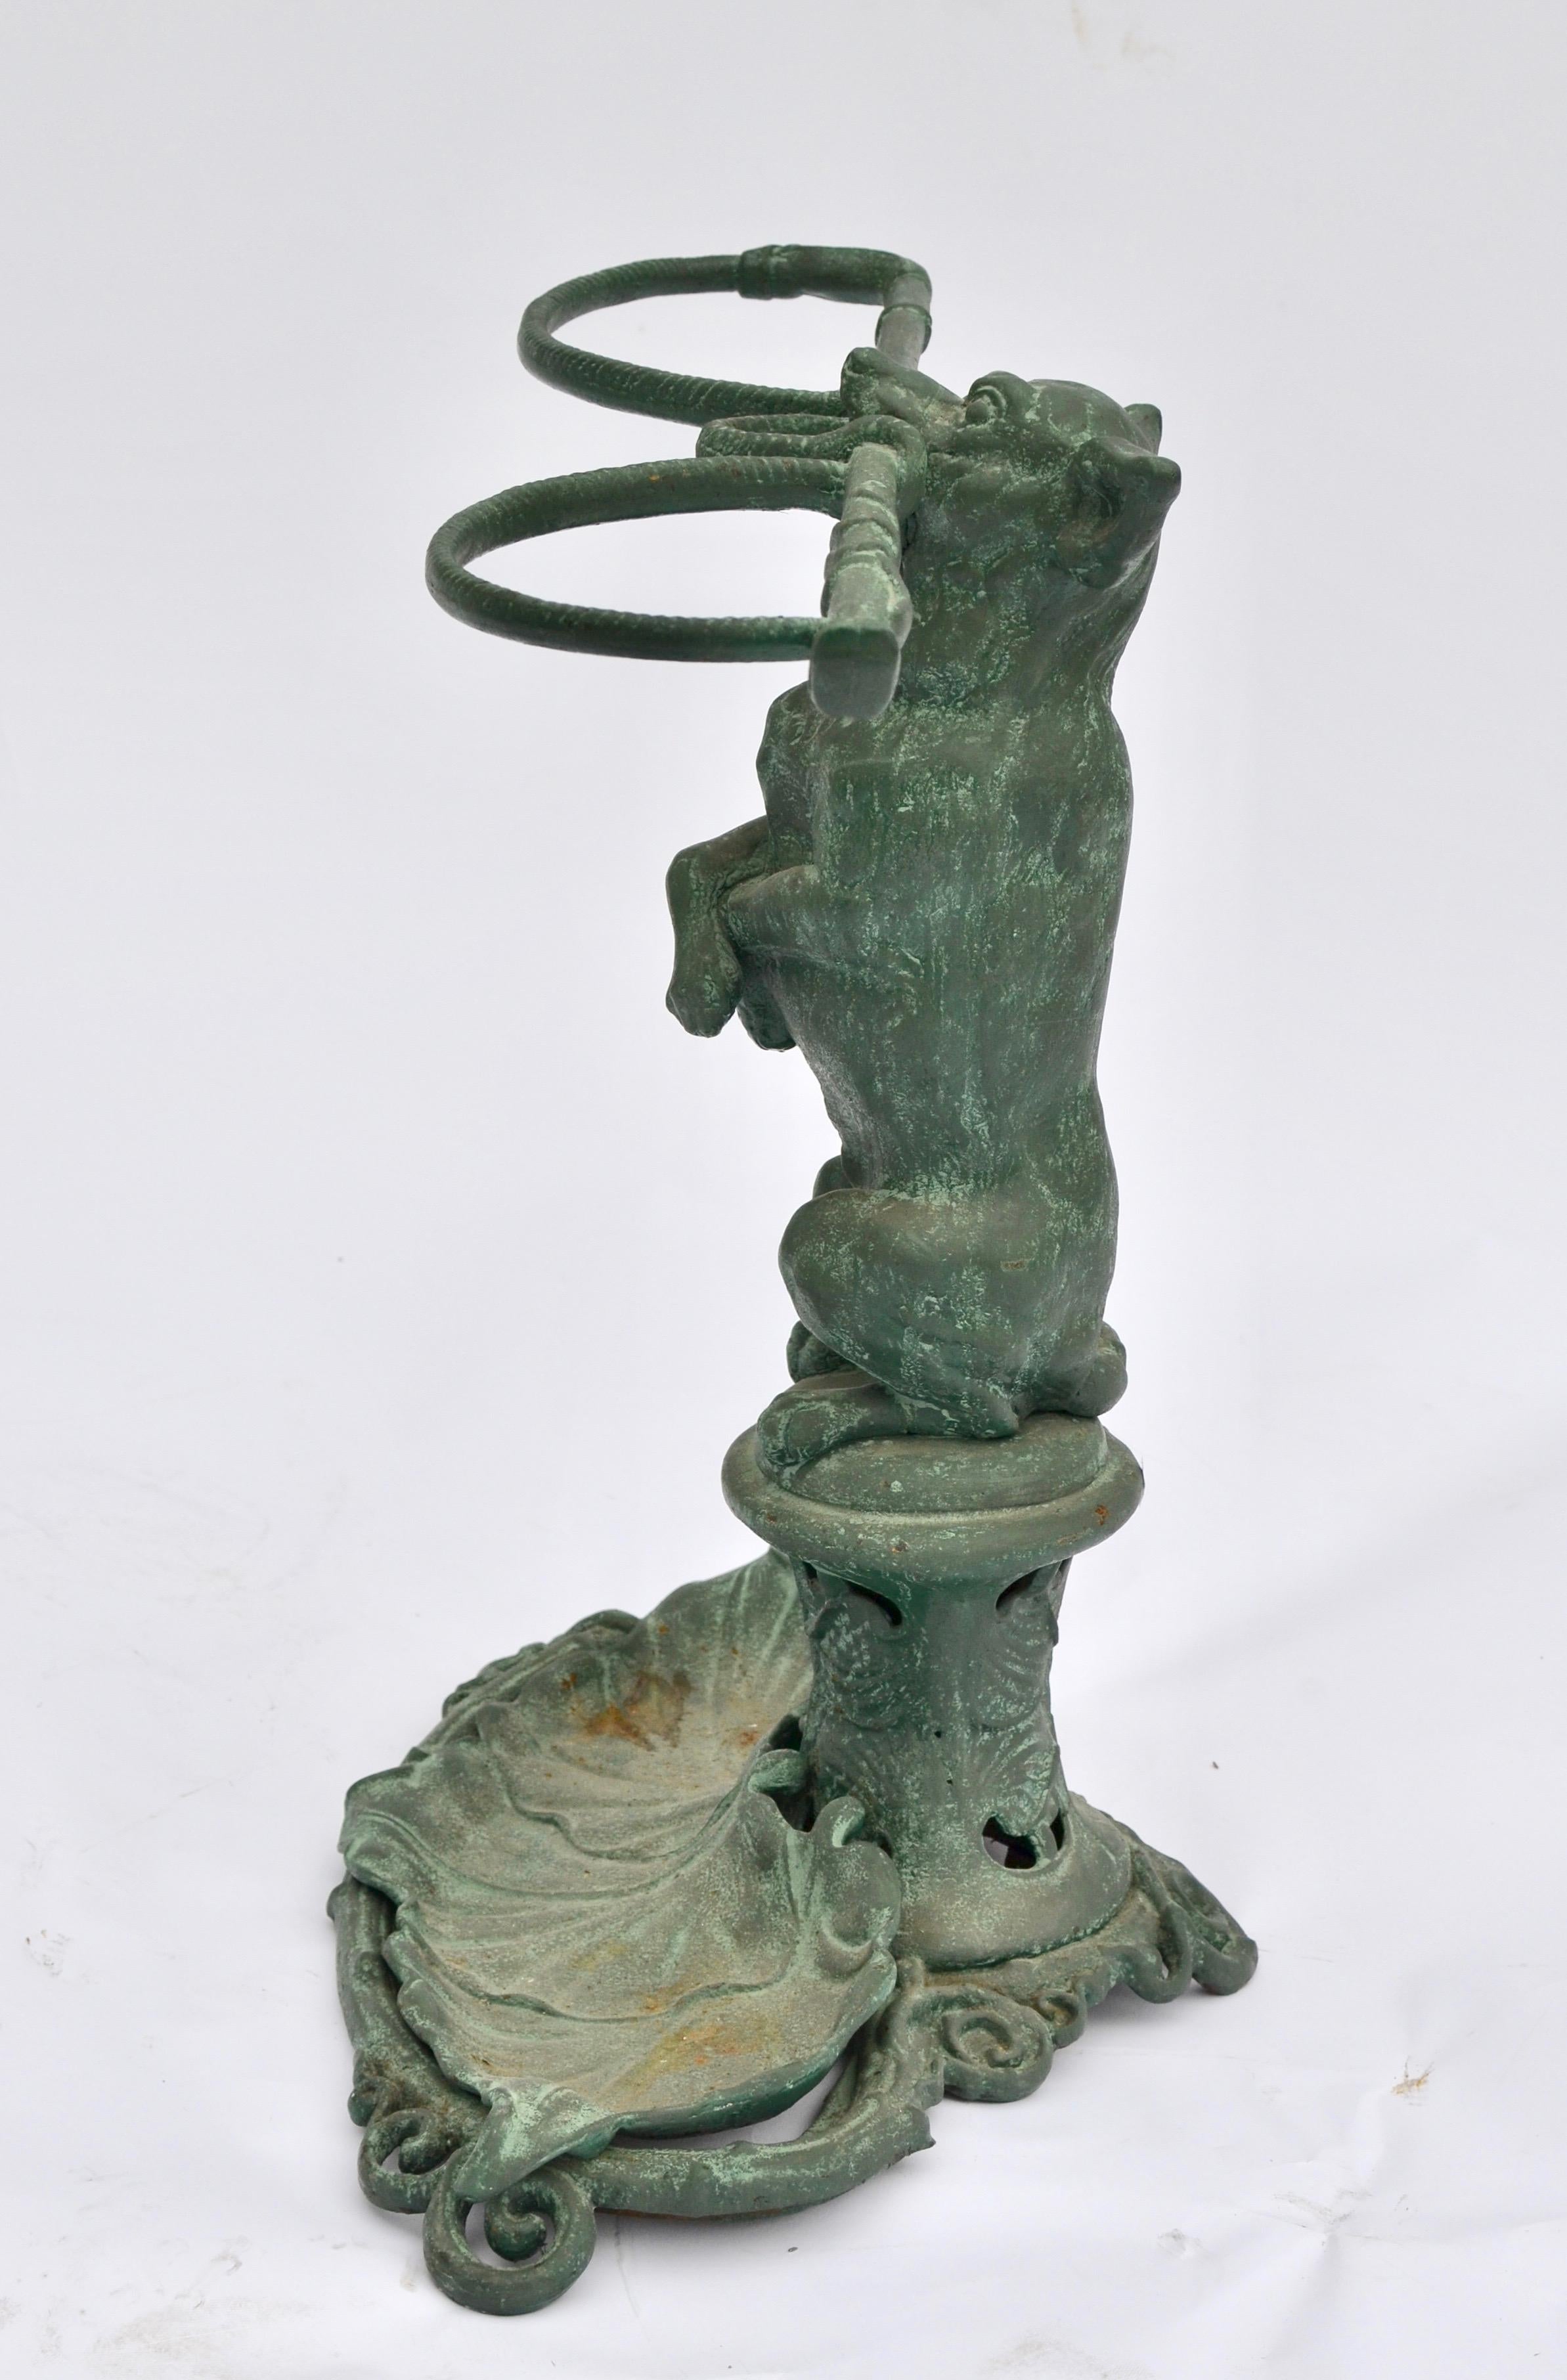 A figural cast iron umbrella stand of a dog holding the umbrellas. Probably Swedish and made by Bolinders foundry, second half of the 19th century.